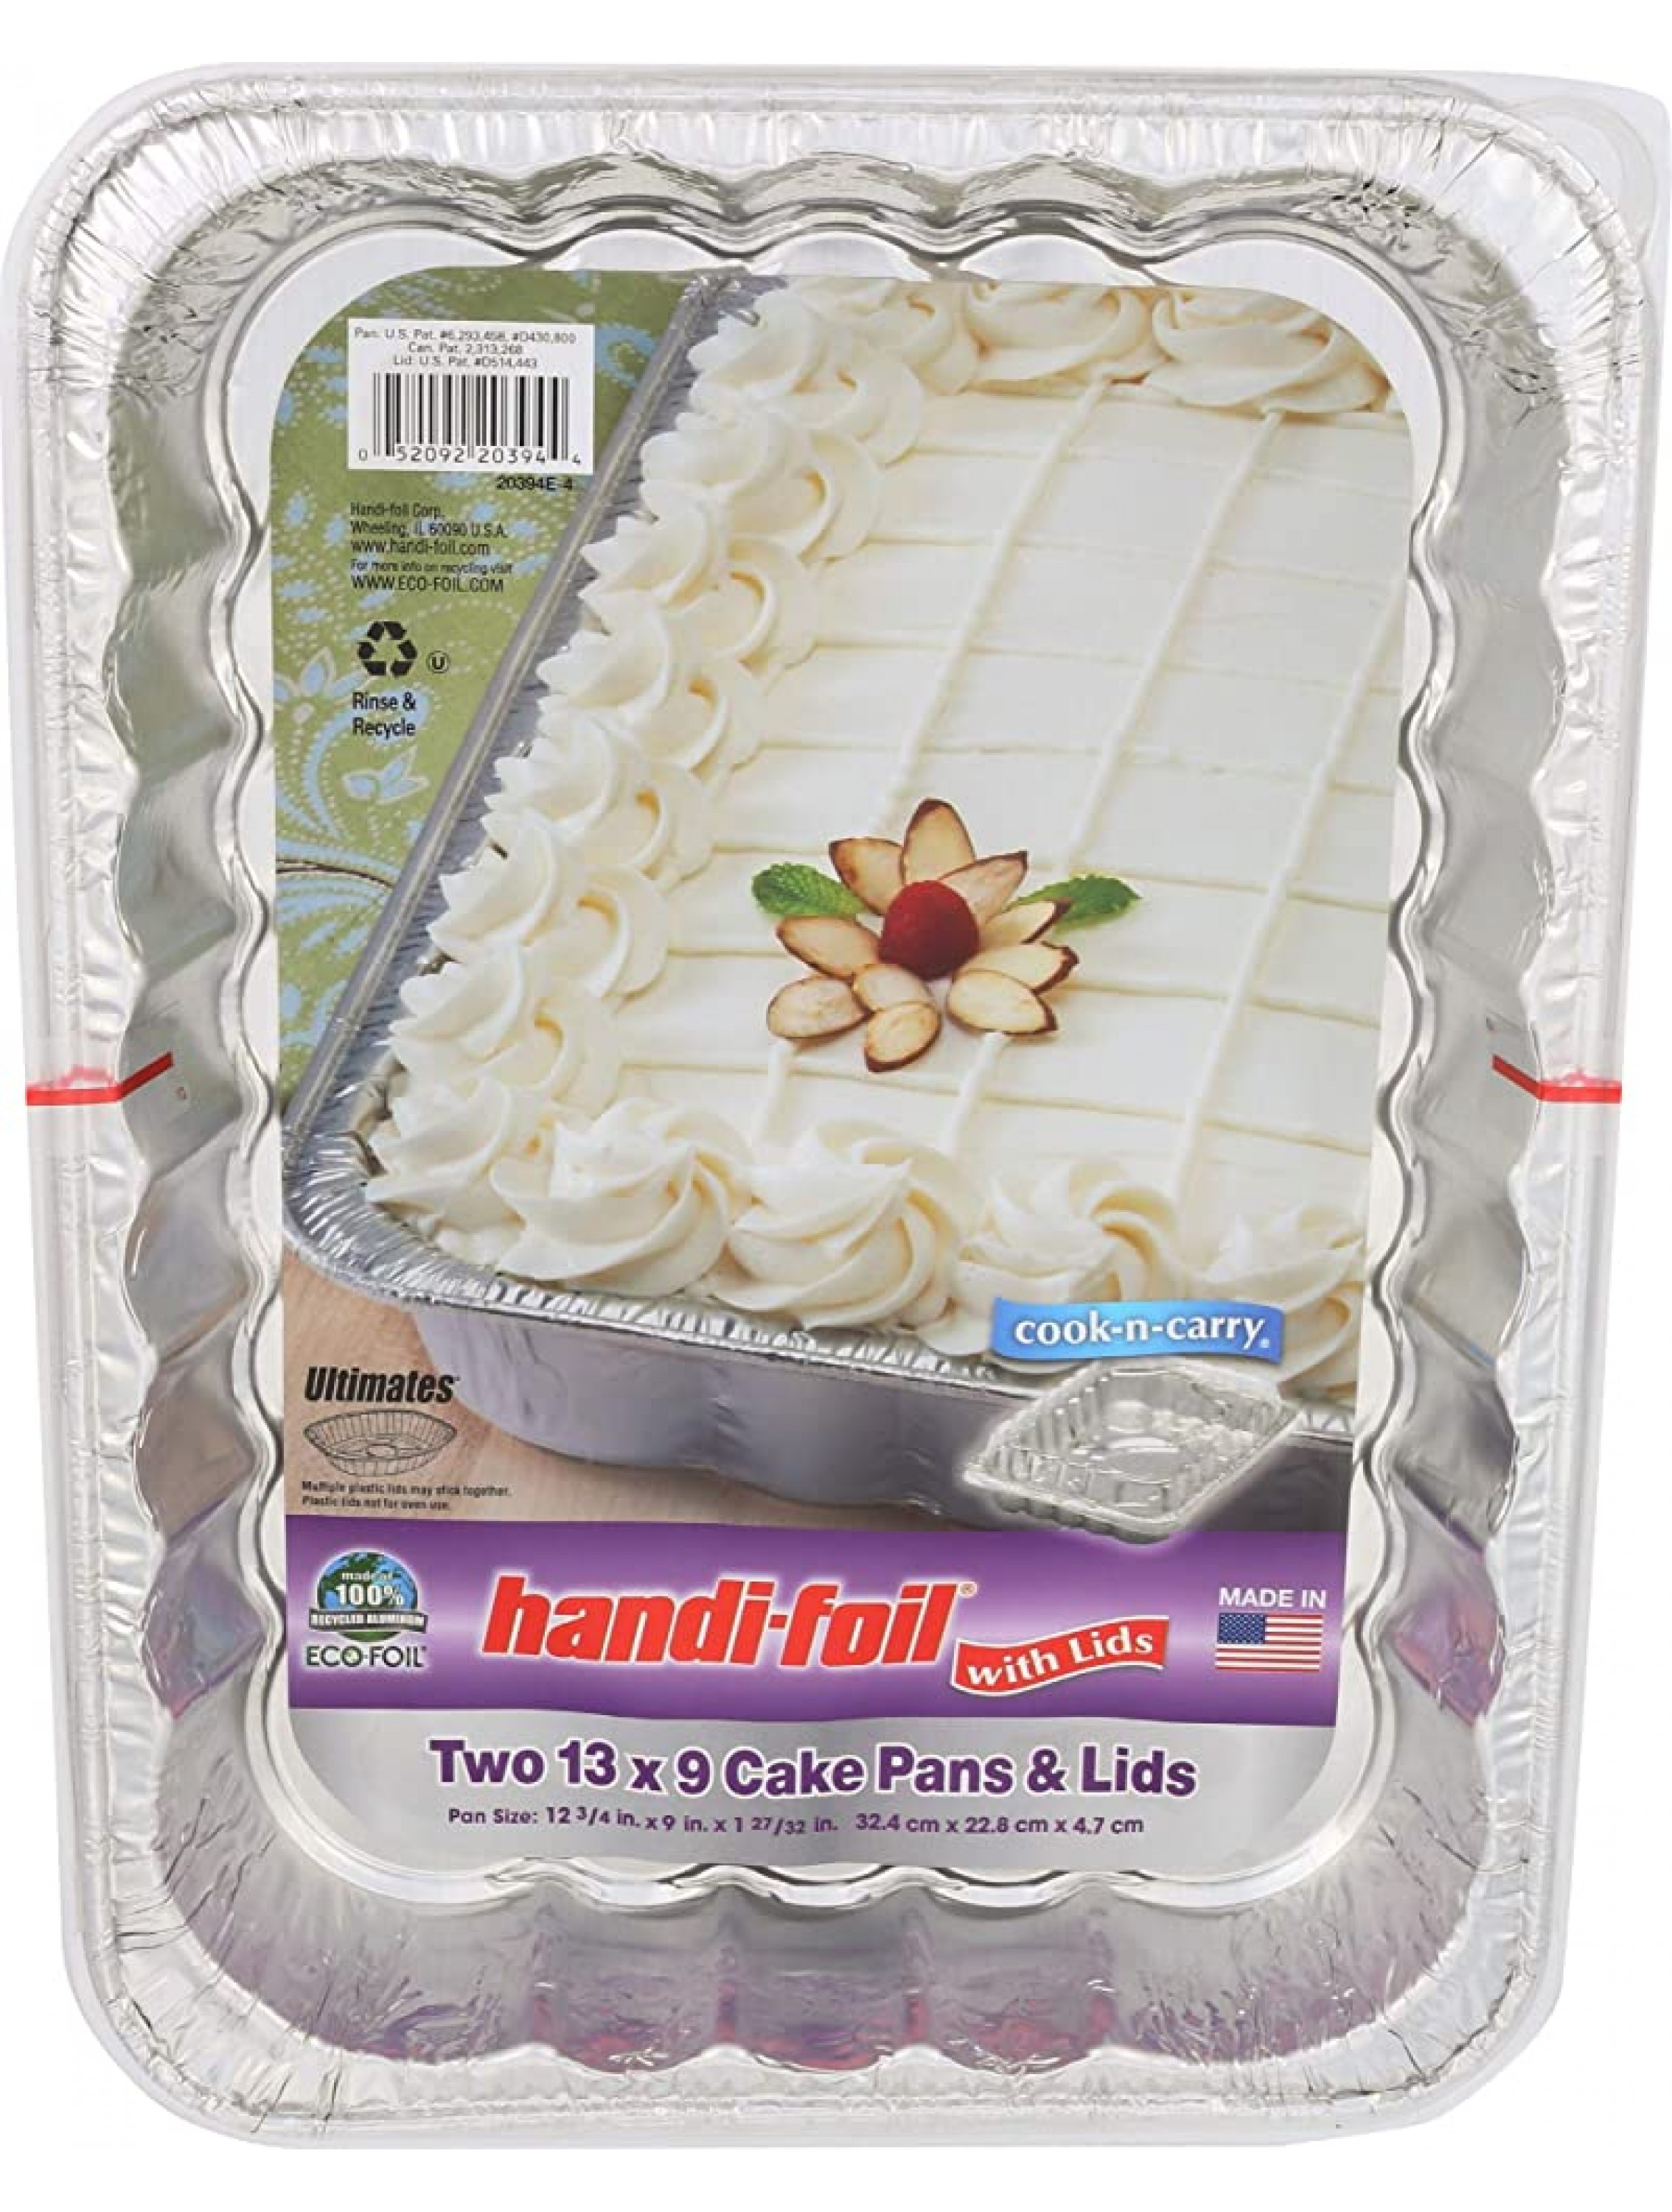 Handi-Foil Cook-N-Carry Utility Pan With Lid 2 Ct - BKS1VD08T